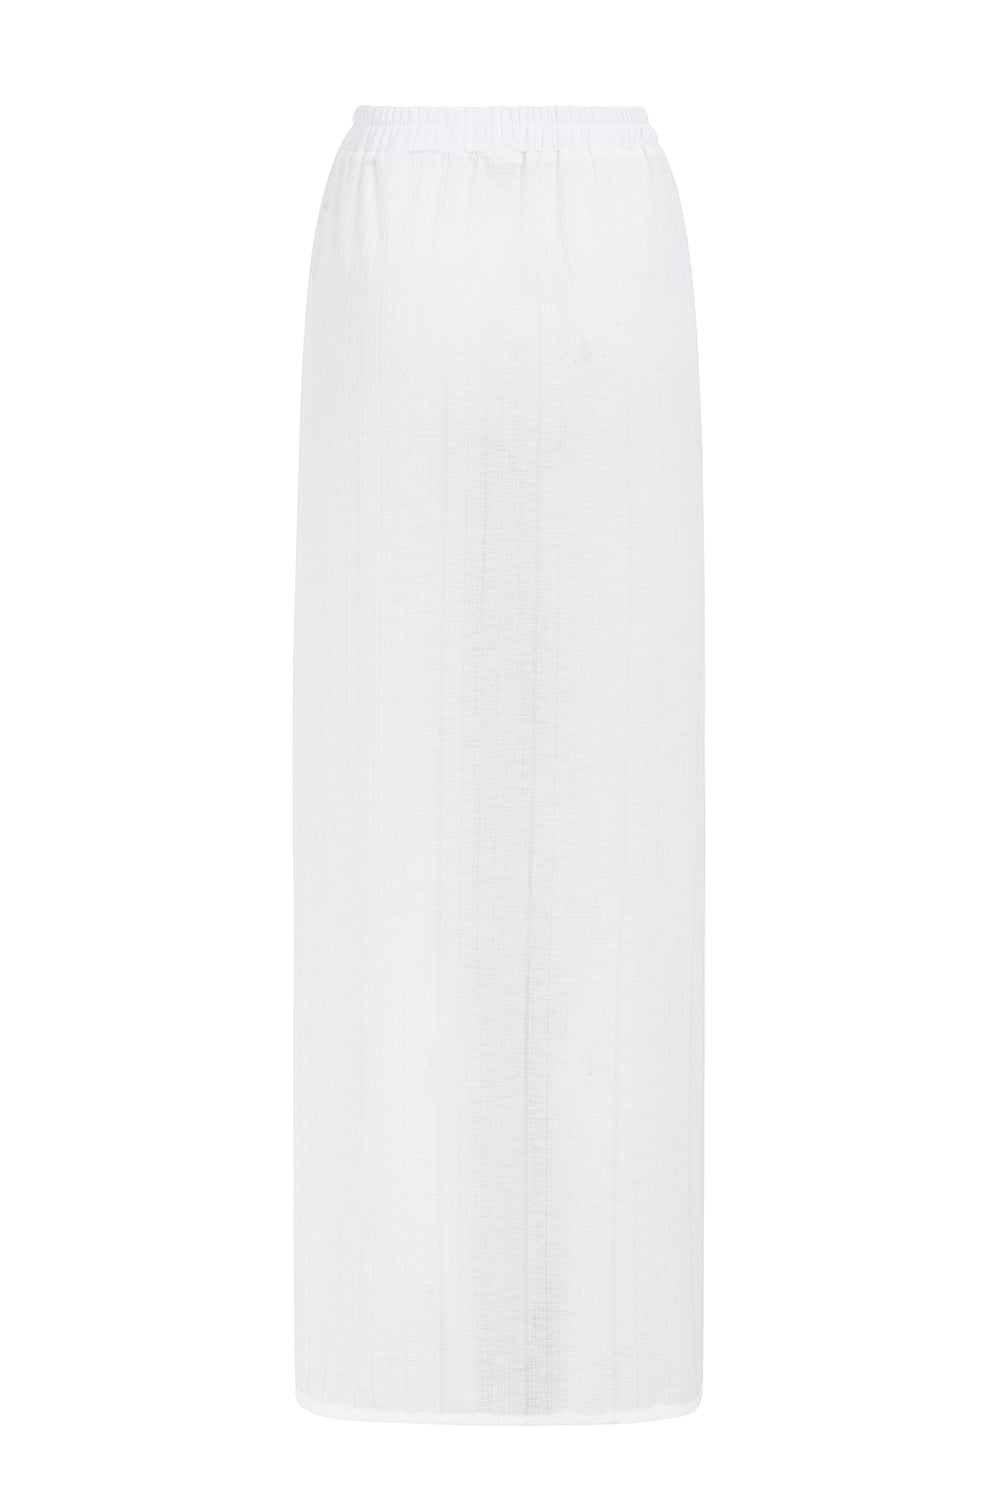 WHITE CABUGAO SKIRT (OUT OF STOCK)